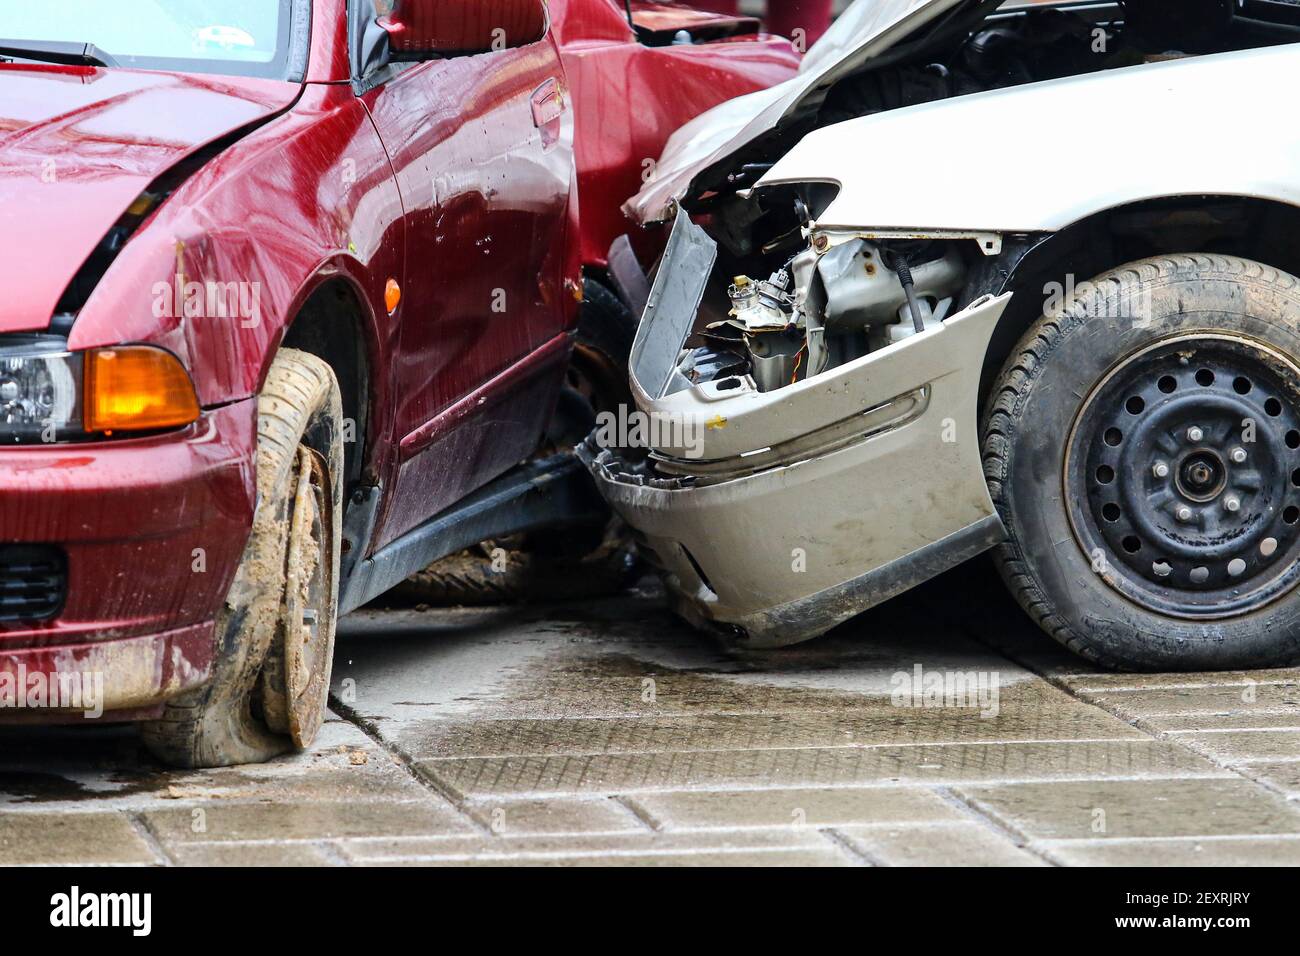 Car accident in the street. Smashed auto after car collision Stock Photo